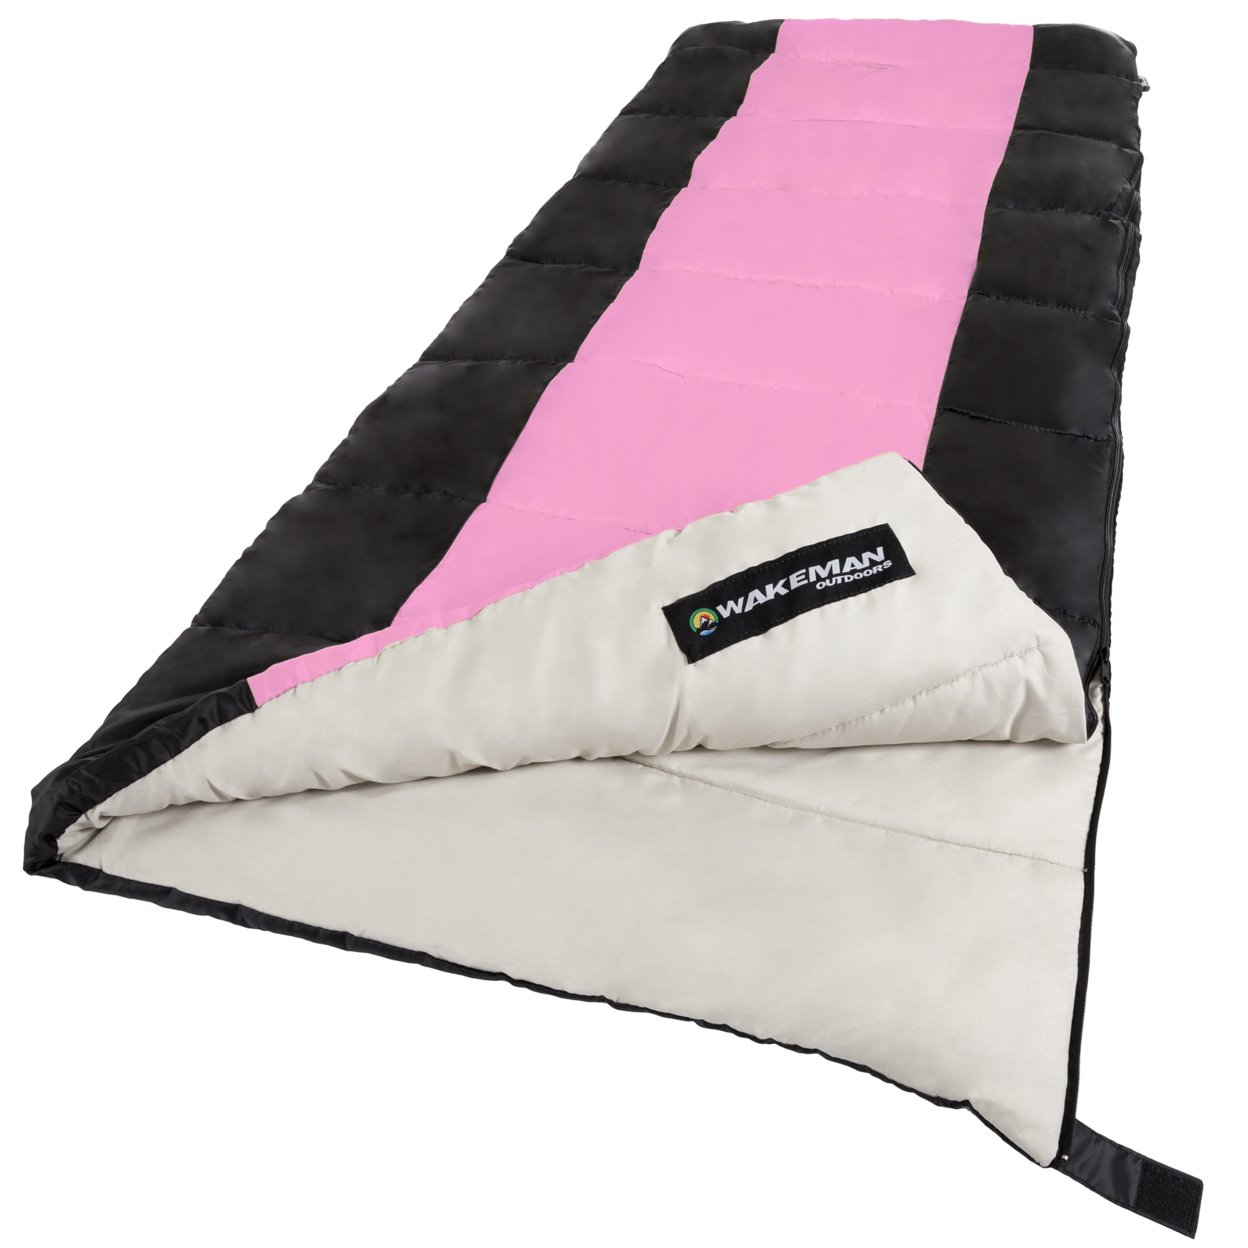 Sleeping Bag, 2-Season With Carrying Bag For Adults And Kids, Otter Tail Sleeping Bag (Pink) (For Camping And Festivals)